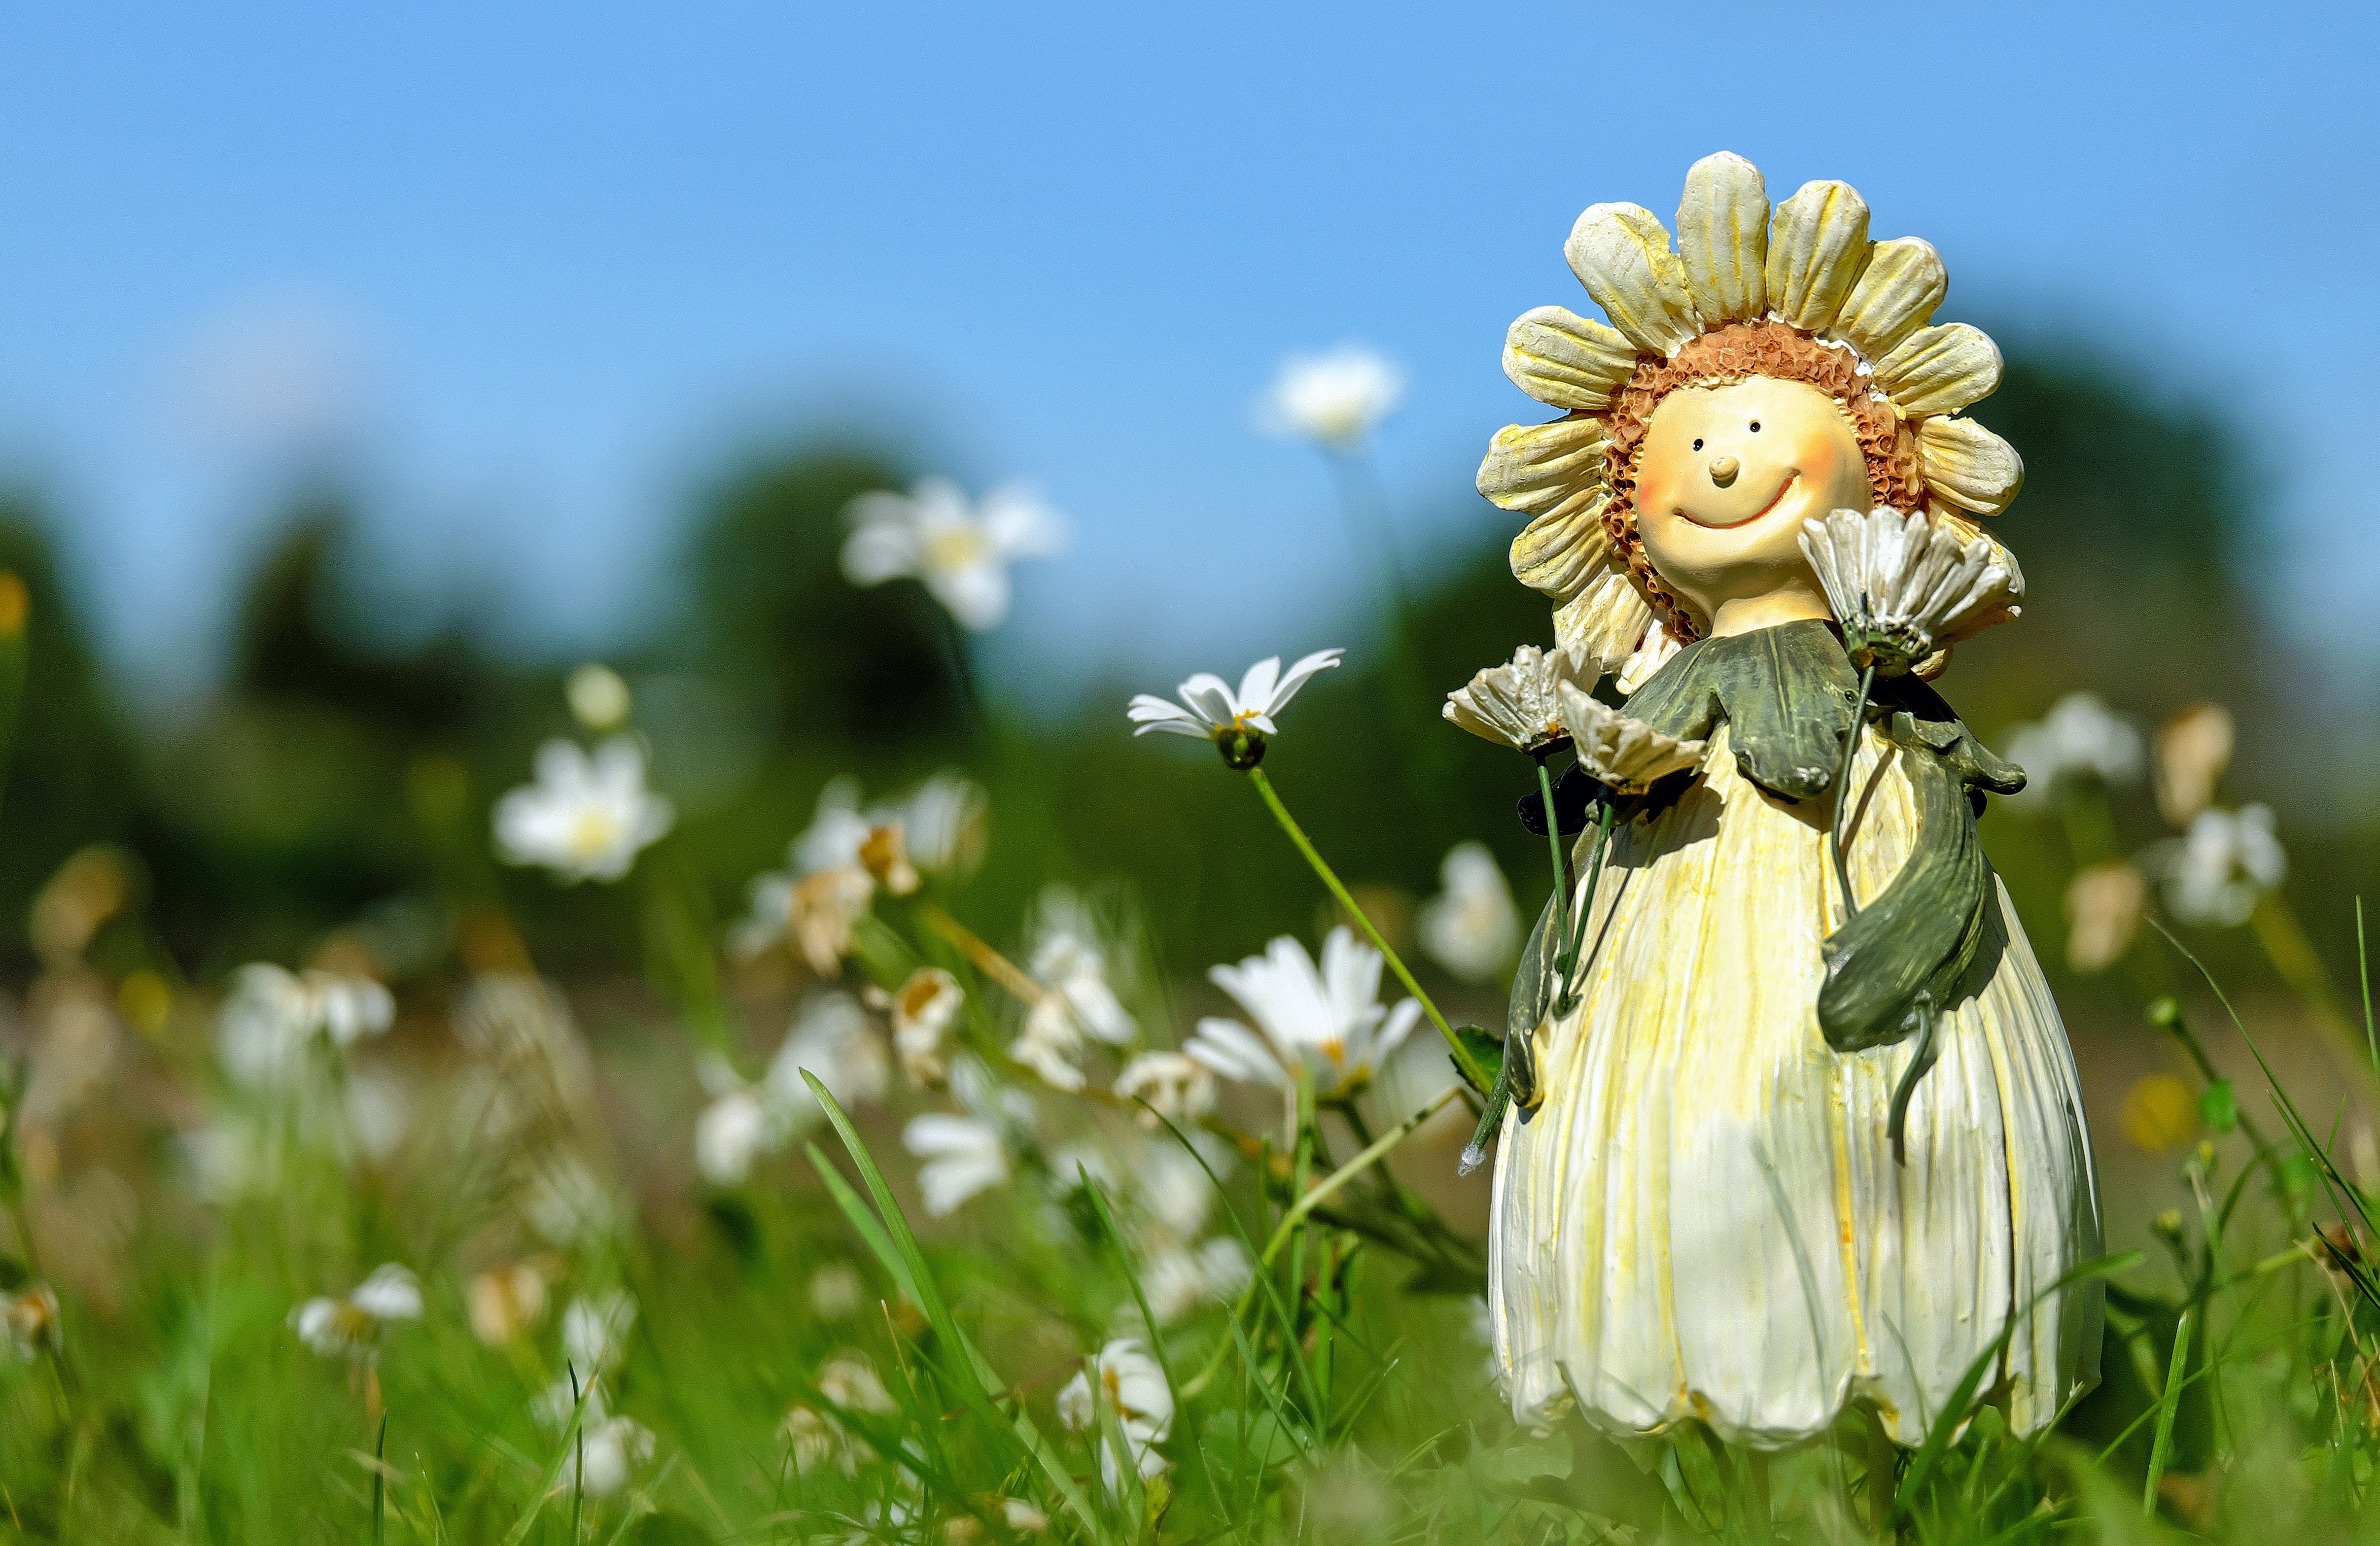 White daisy flower field with plush toy during daytime photo